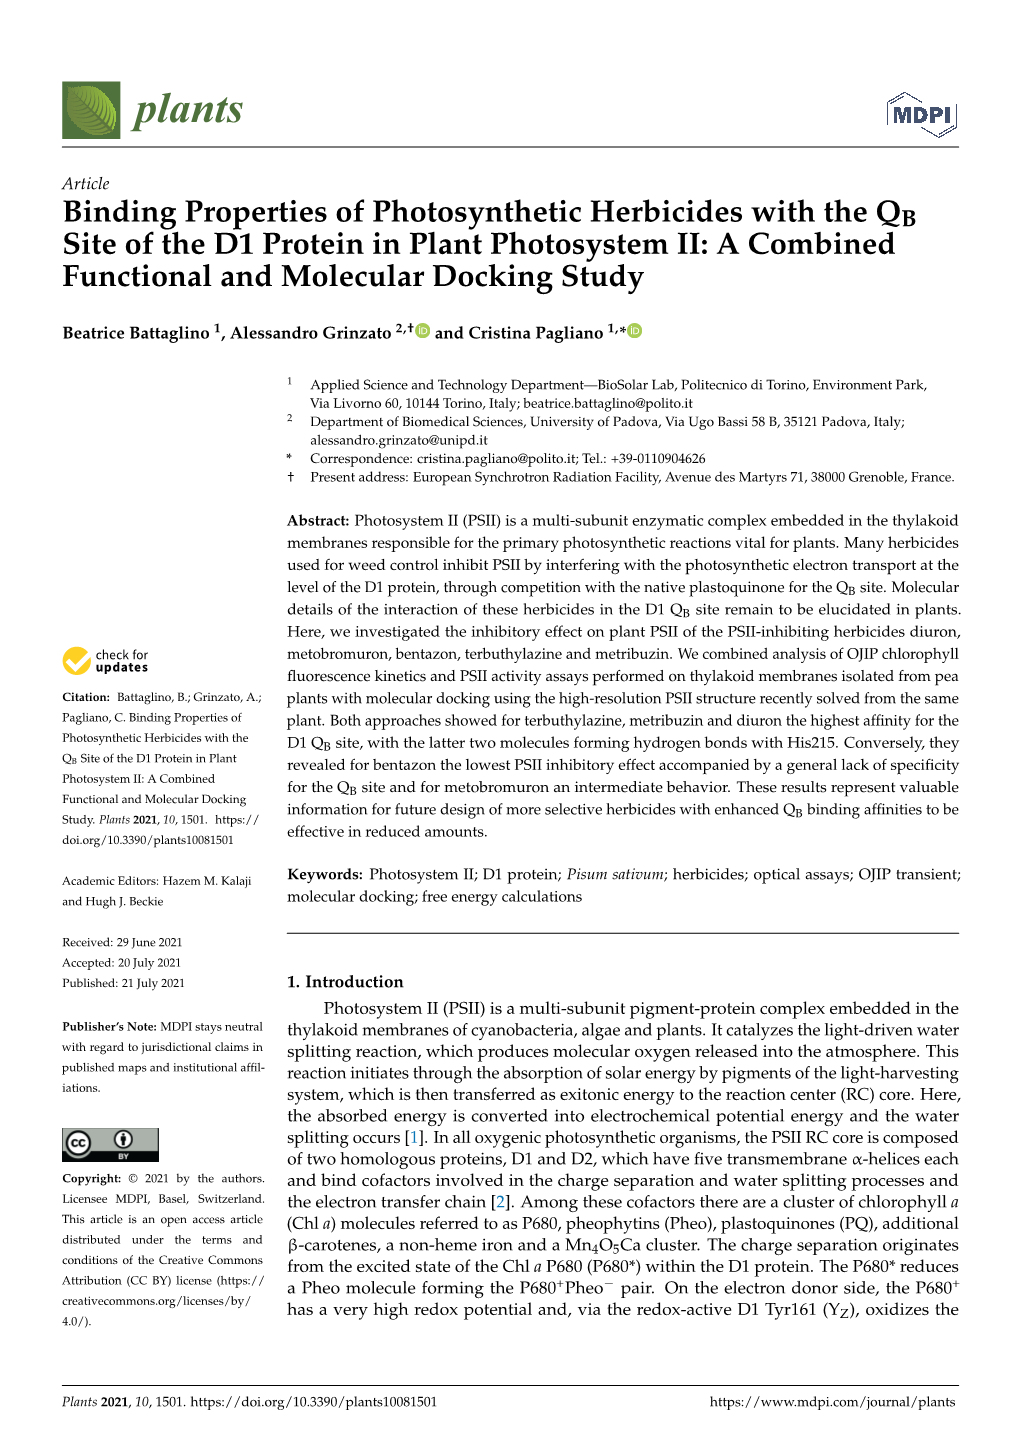 Binding Properties of Photosynthetic Herbicides with the QB Site of the D1 Protein in Plant Photosystem II: a Combined Functional and Molecular Docking Study